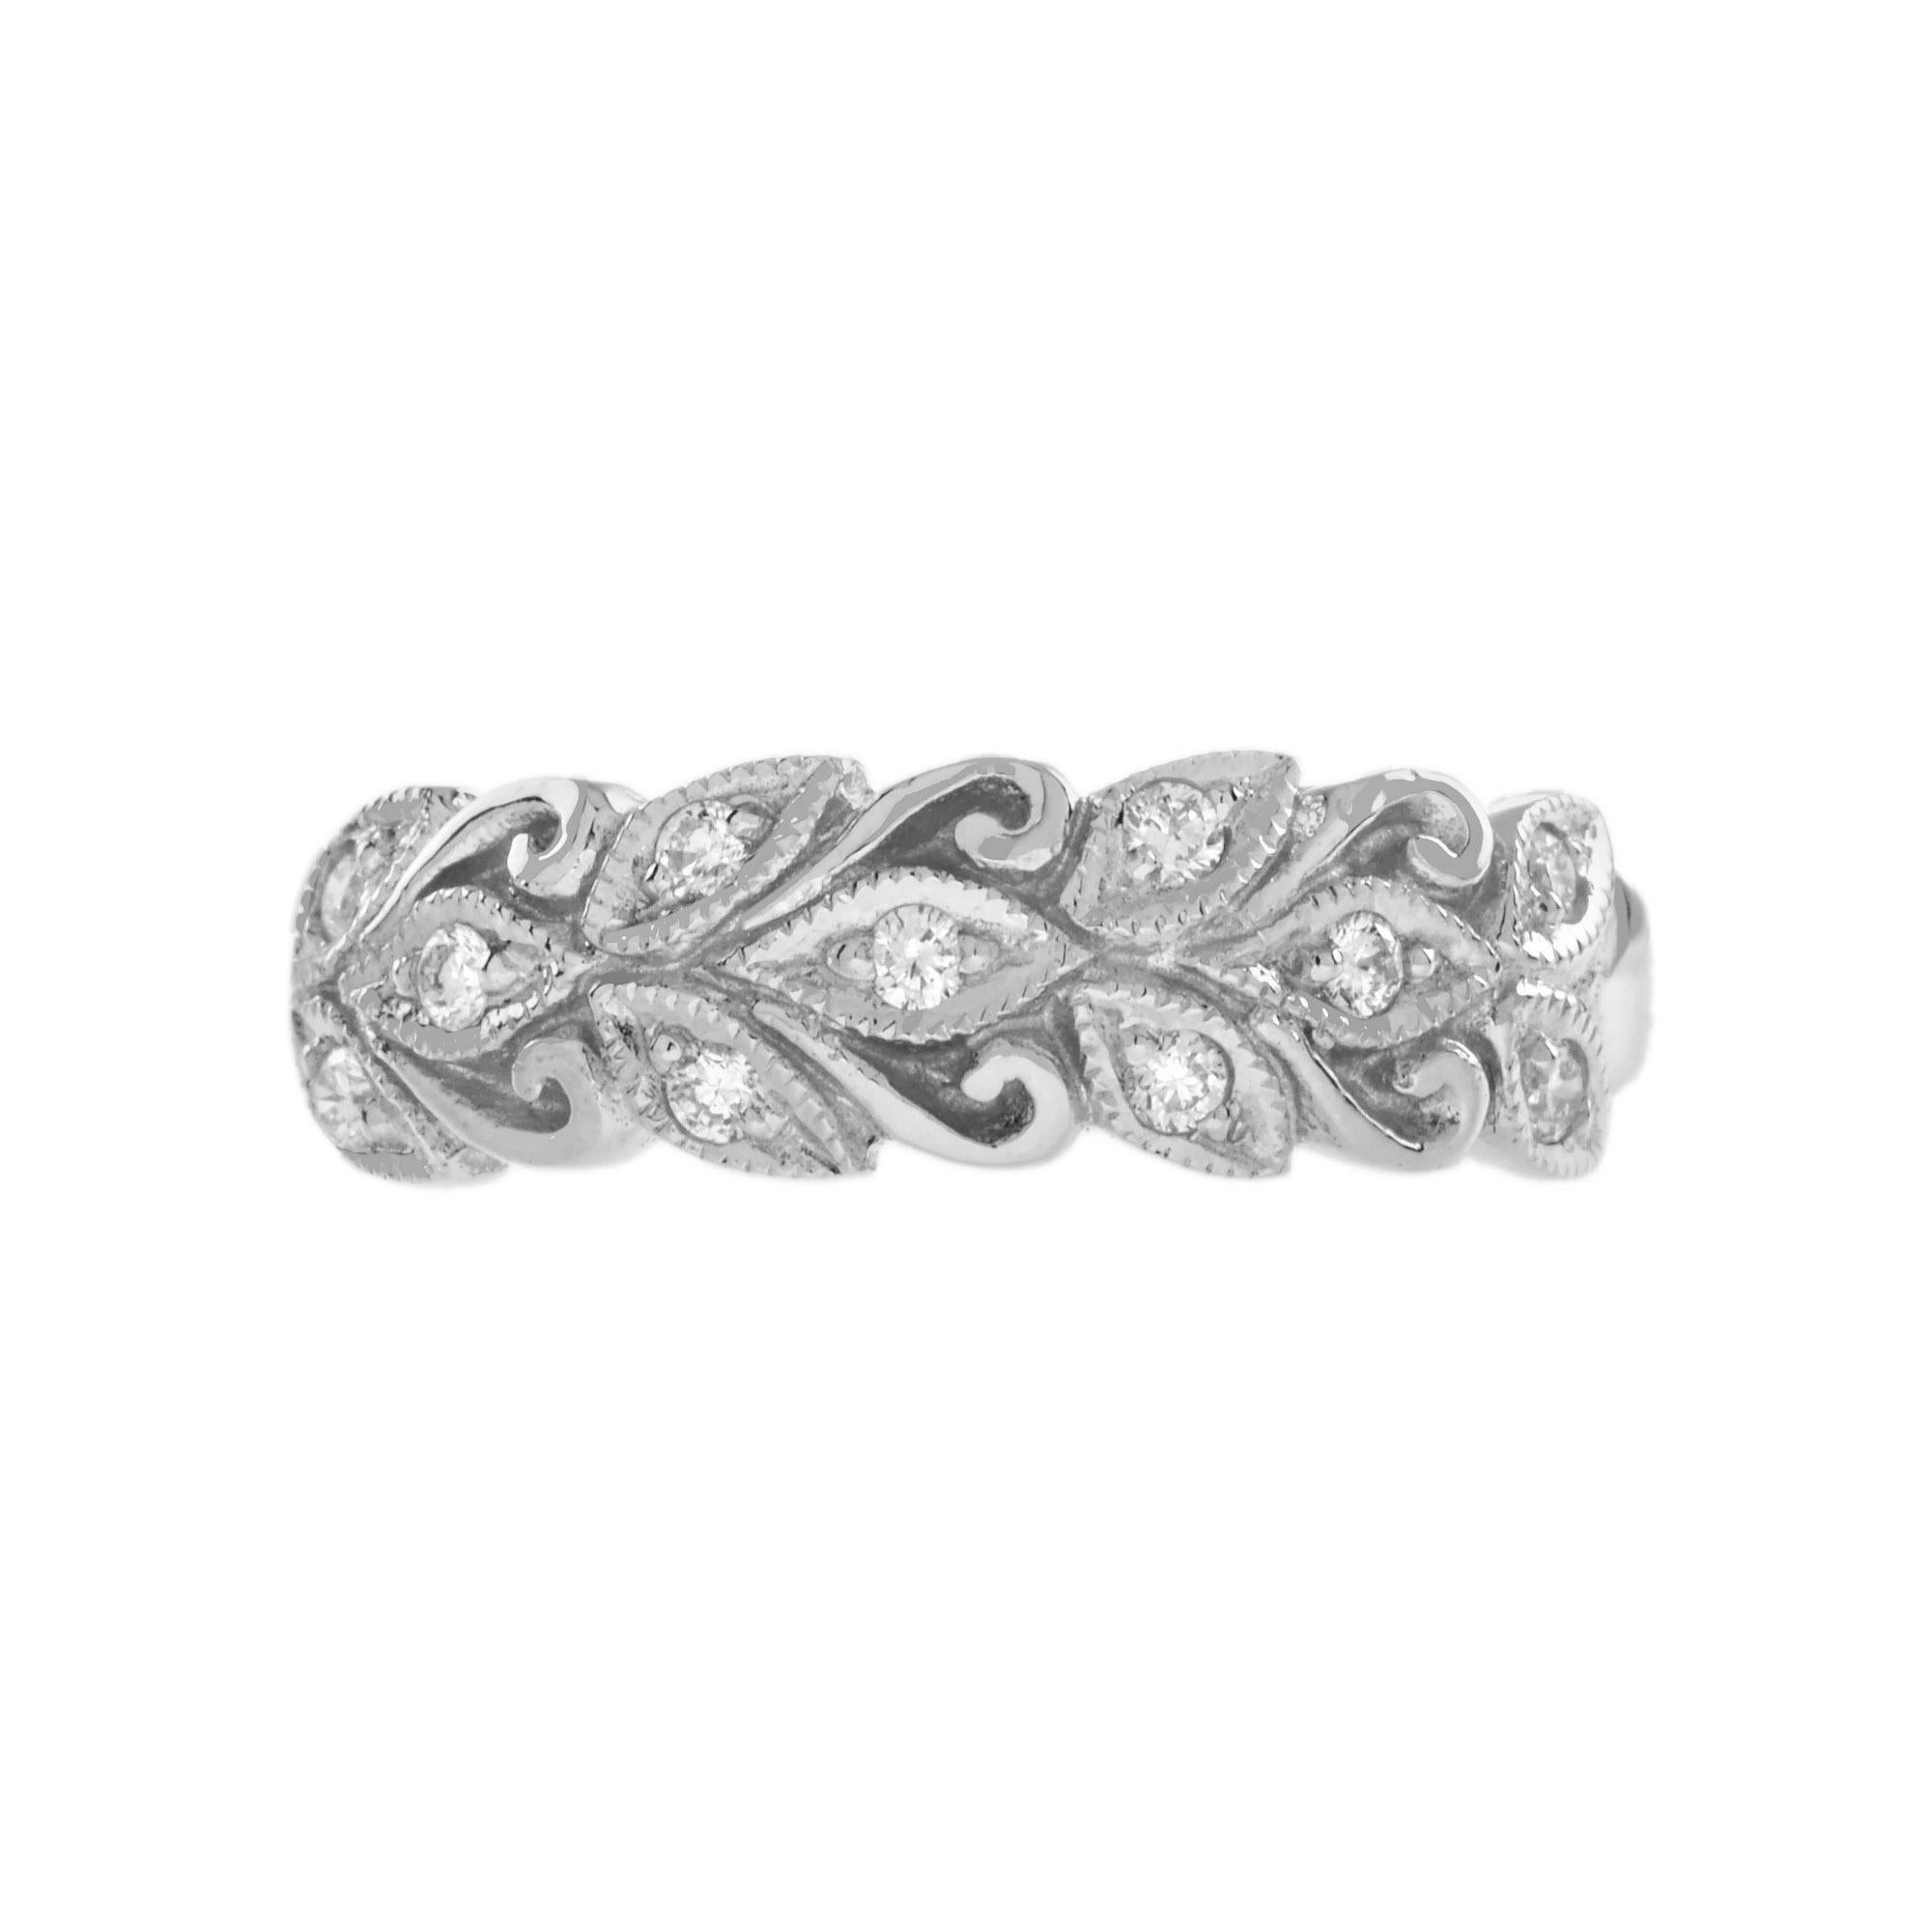 For Sale:  Diamond Floral Motif Band Ring in 9K White Gold 3